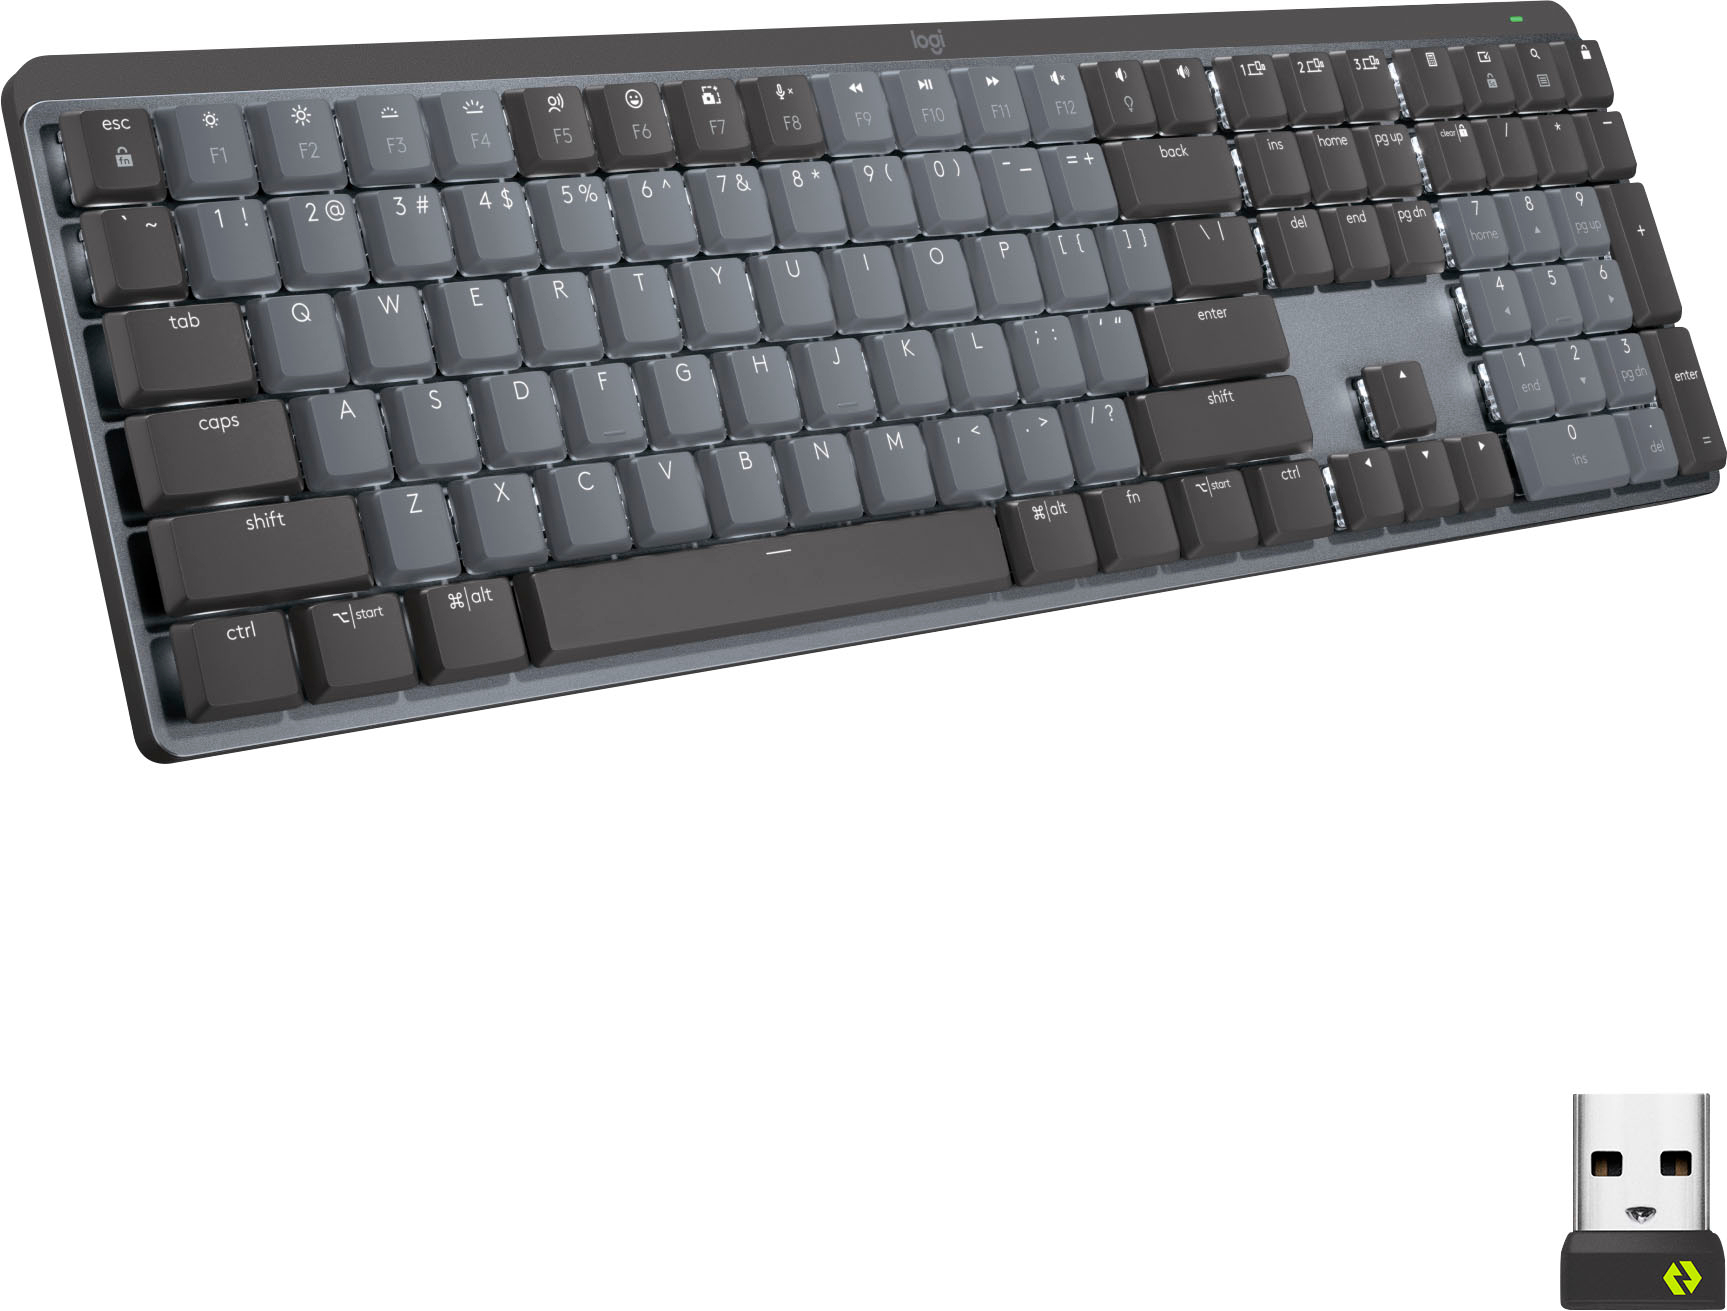 MX Mechanical Full size Wireless Mechanical Switch Keyboard for Windows/macOS with Backlit Keys Graphite 920-010547 - Best Buy